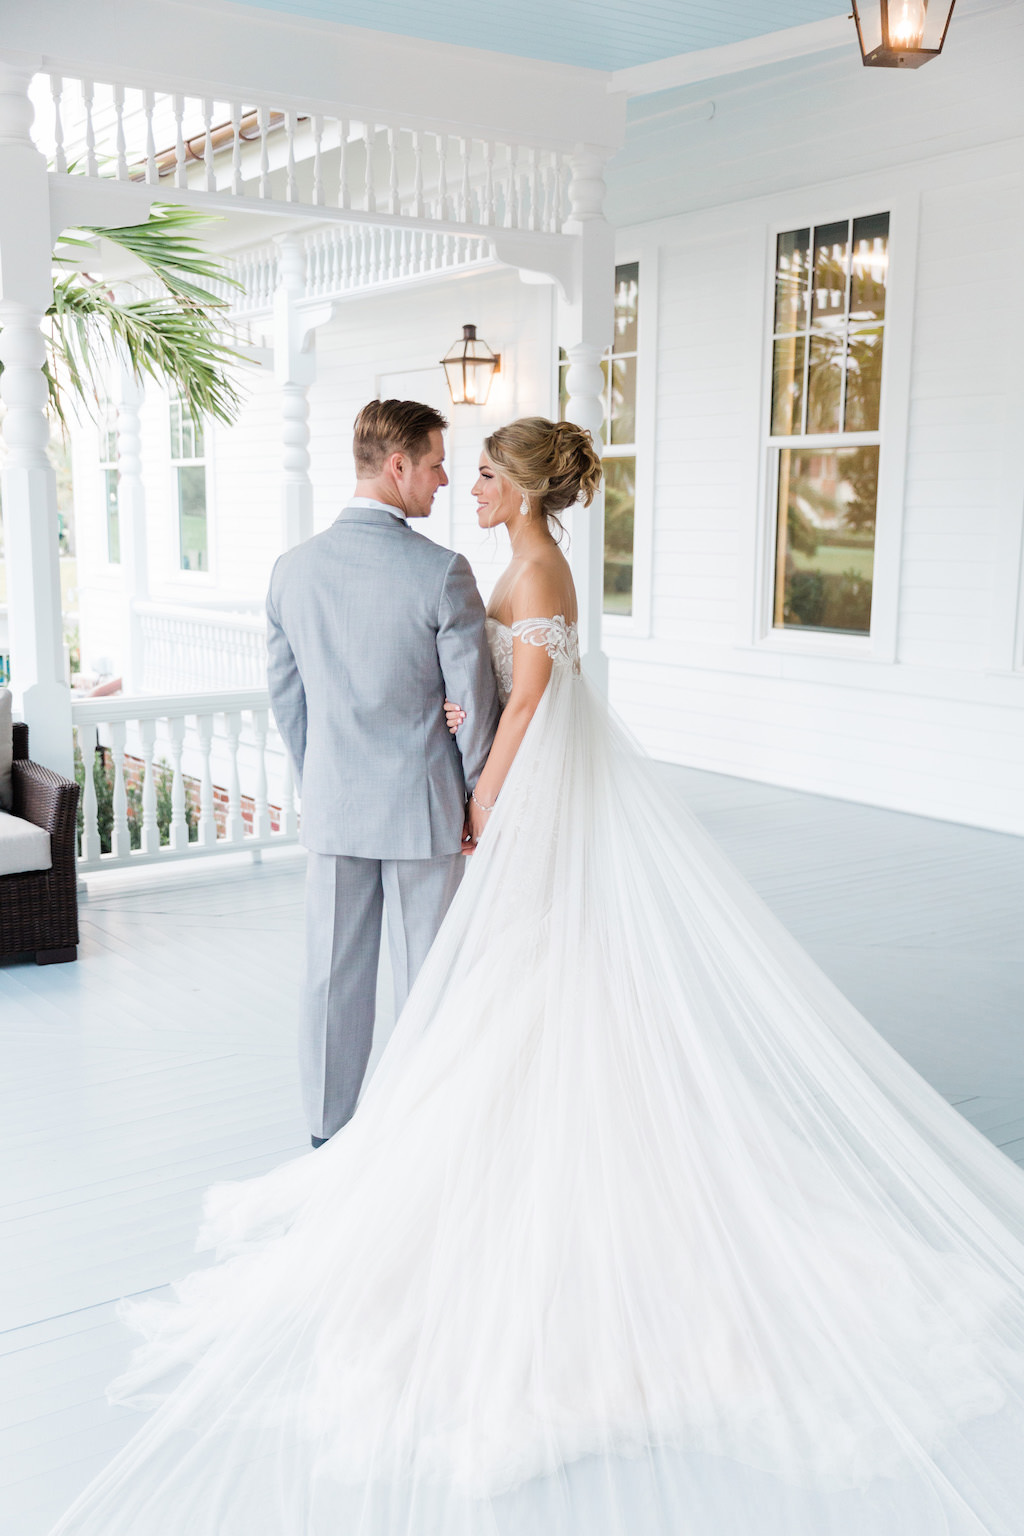 Romantic, Modern Florida Bride and Groom, Wearing White Couture Wedding Dress with Long Tulle Cape | Tampa Bay Hair and Makeup Artists Femme Akoi | Tampa Bay Couture Wedding Dress Boutique Isabel O'Neil Bridal Collection |